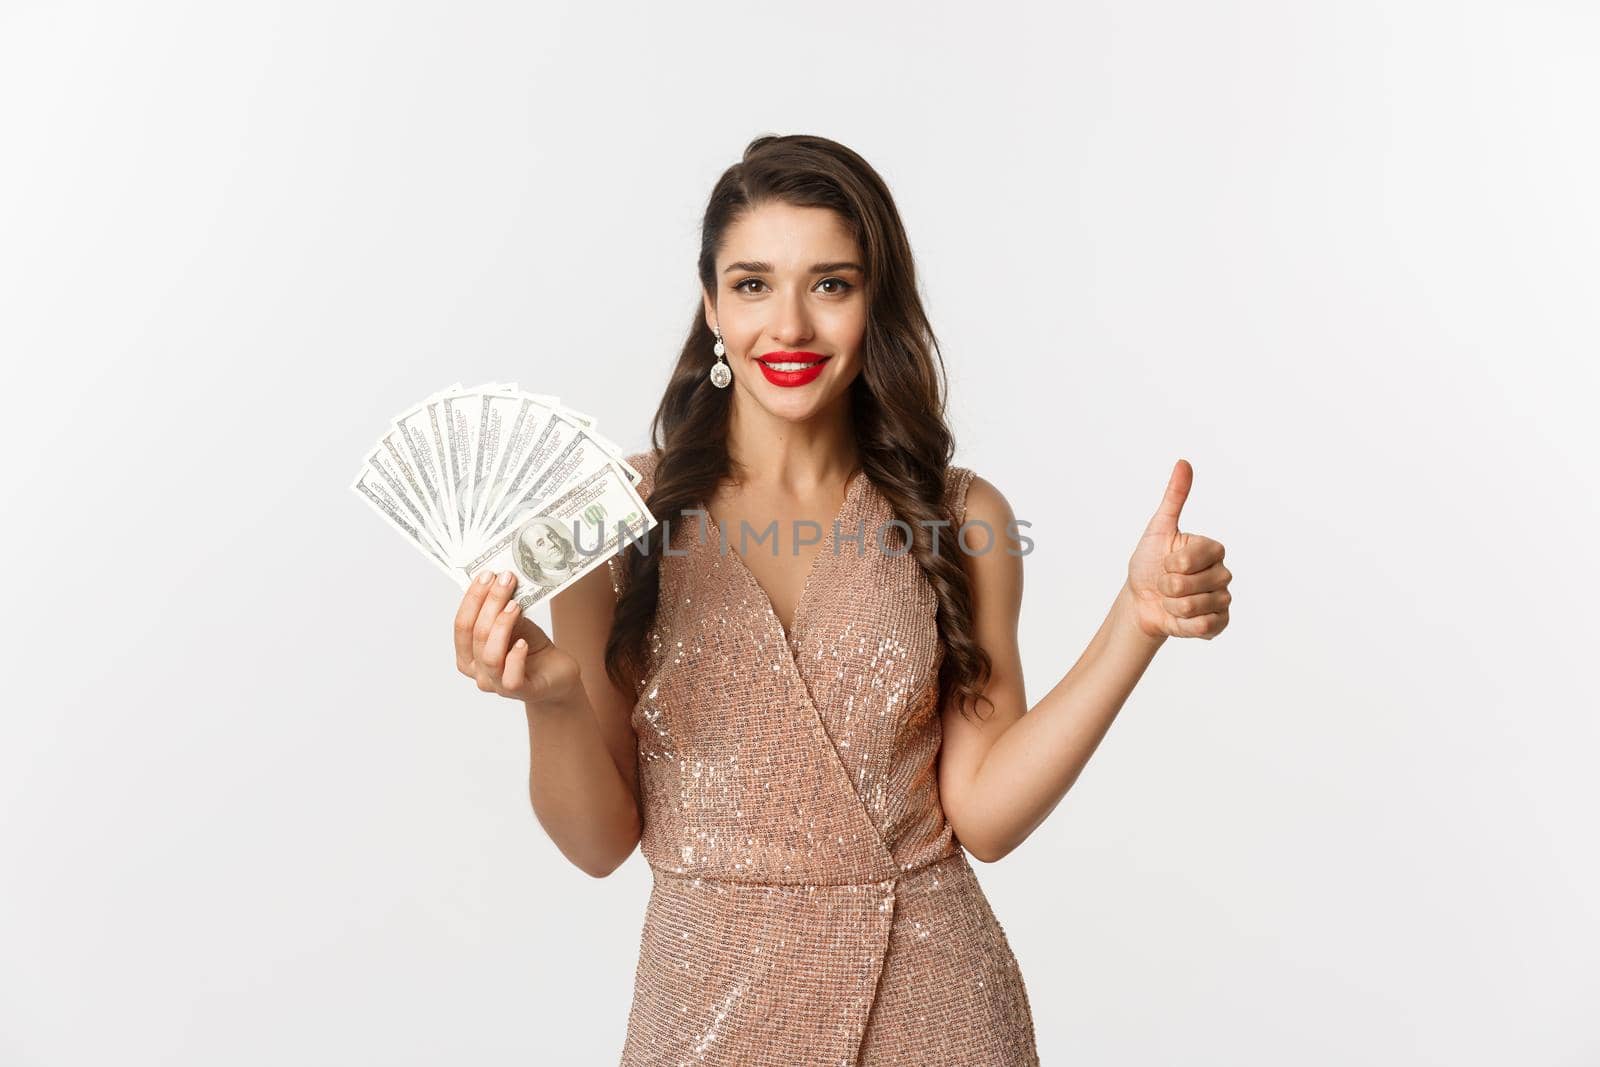 Shopping concept. Attractive, elegant woman in dress showing thumbs-up and money, recommending company, standing over white background.